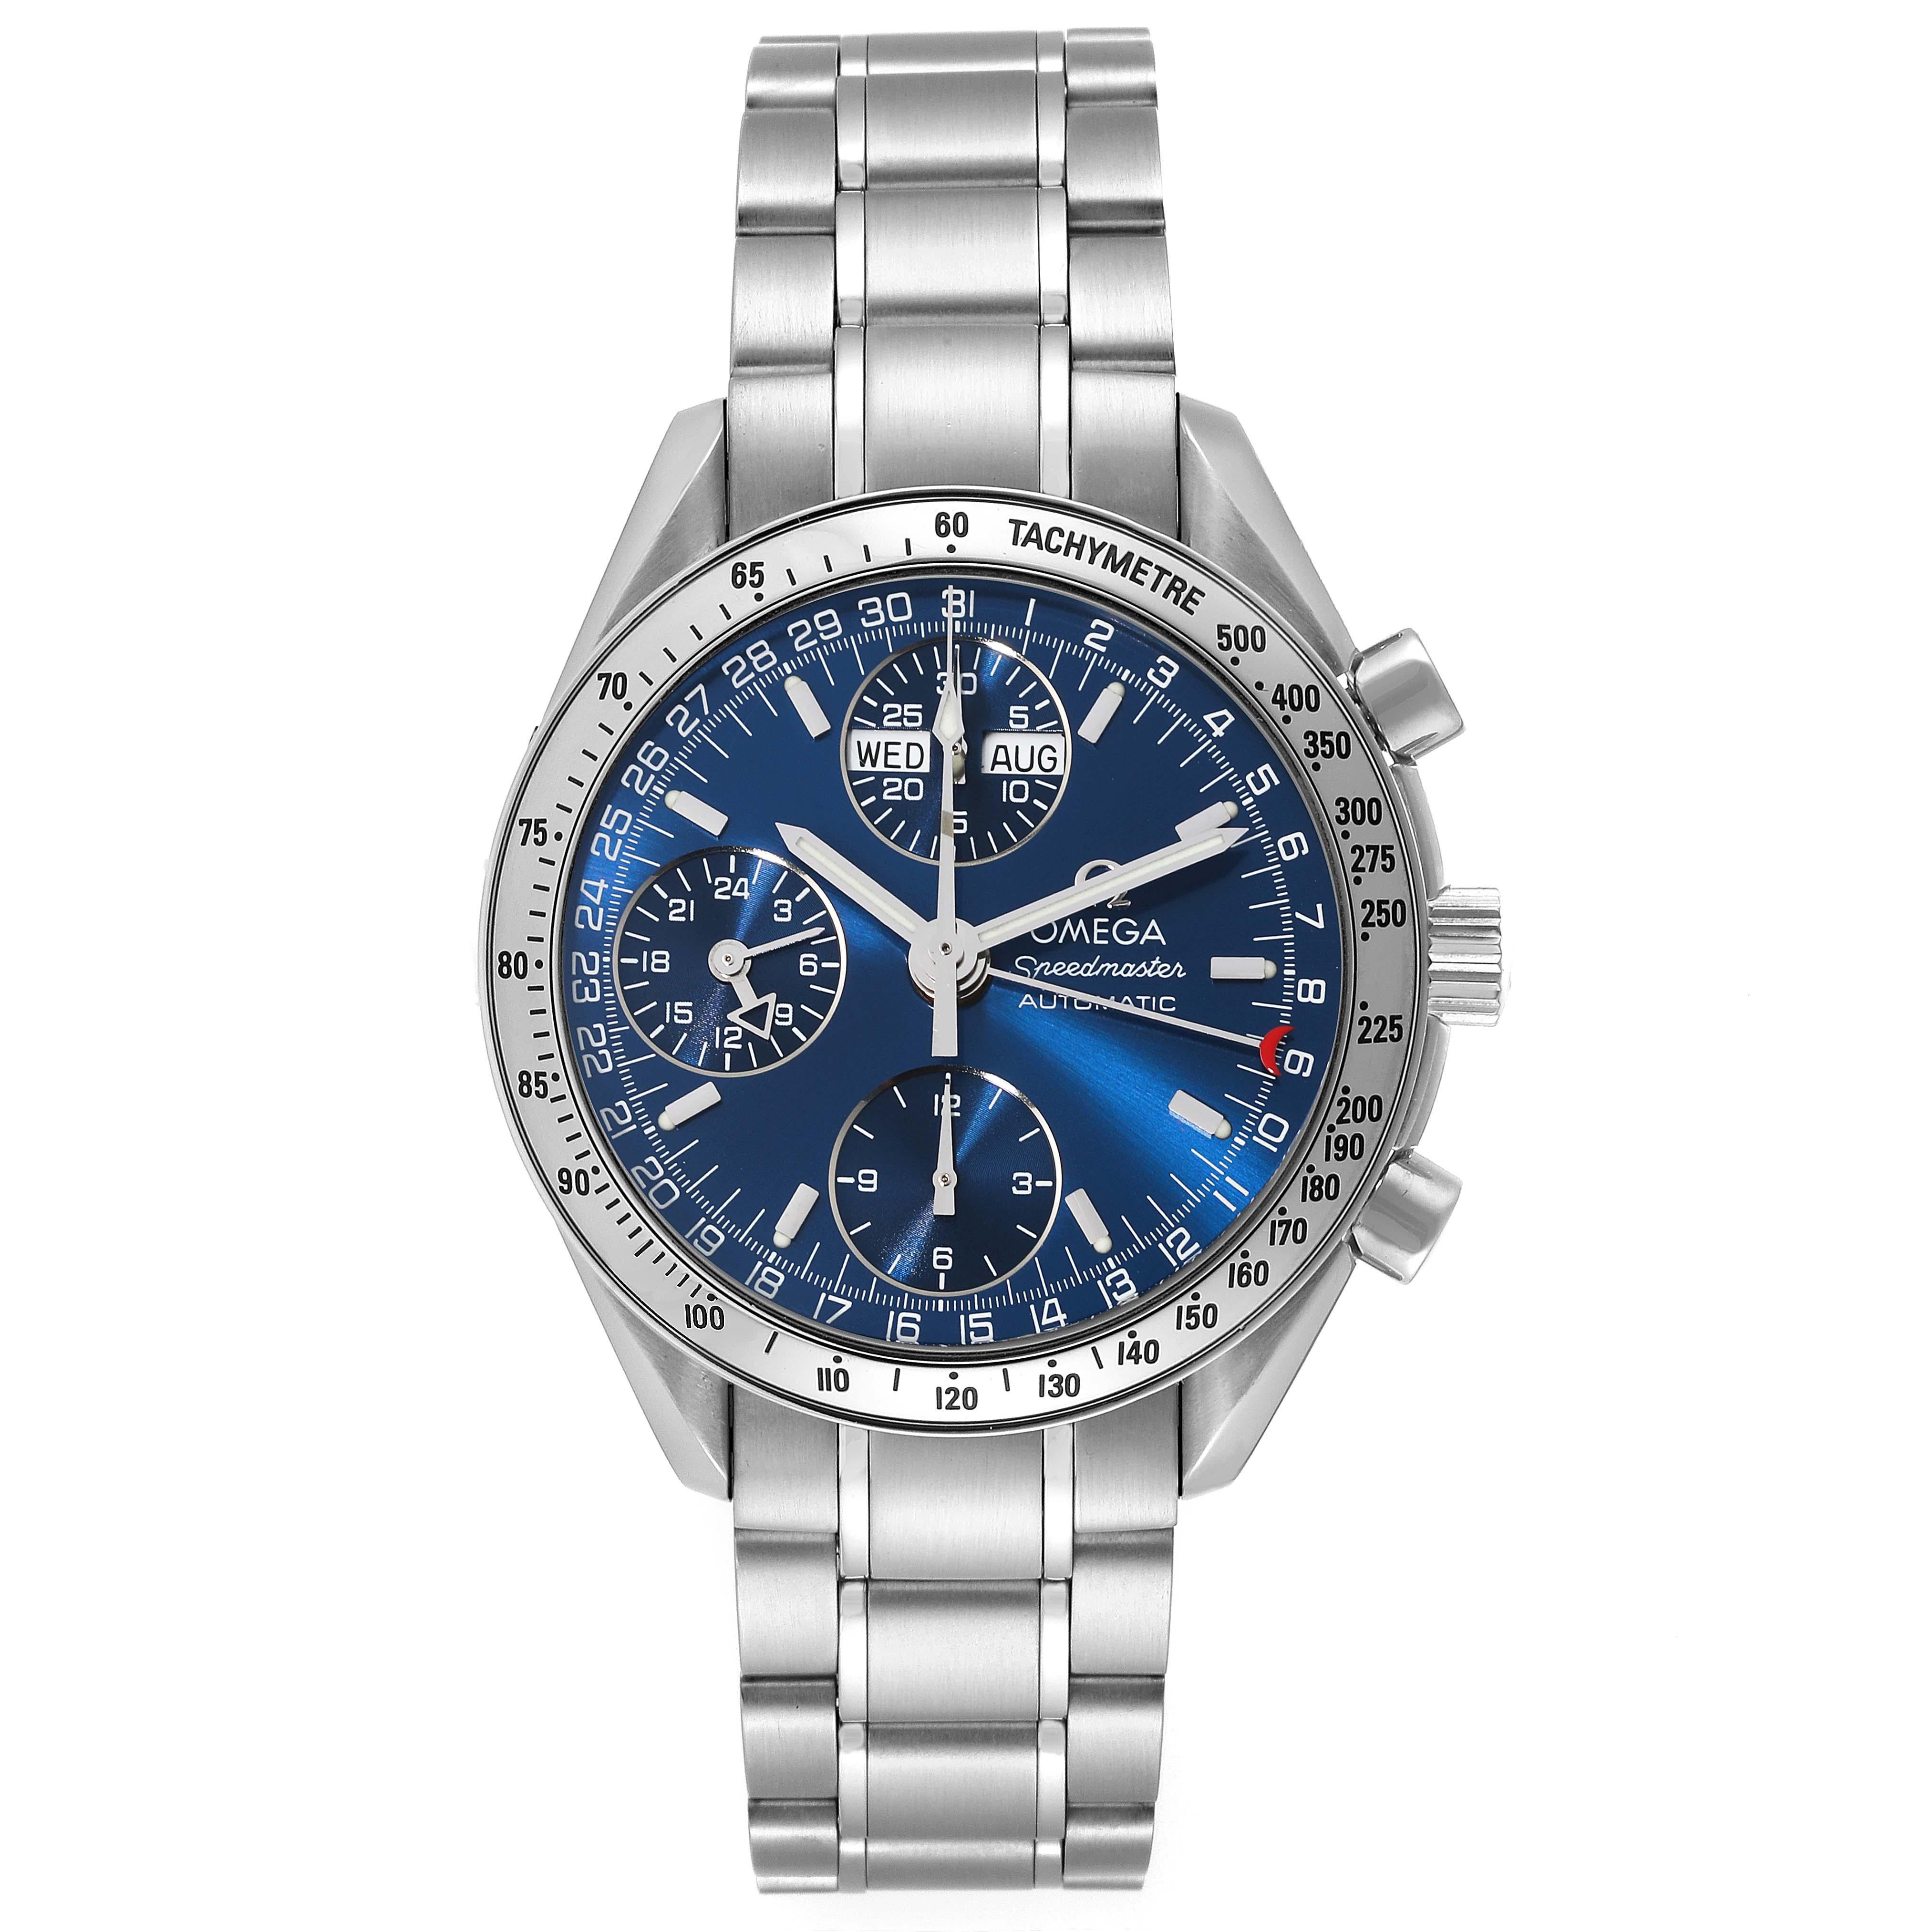 Omega Speedmaster Day-Date 39 Blue Dial Steel Mens Watch 3523.80.00 Box Card. Automatic self-winding chronograph movement. Day, date, and month indications. Stainless steel round case 39.0 mm in diameter. Polished stainless steel bezel with engraved